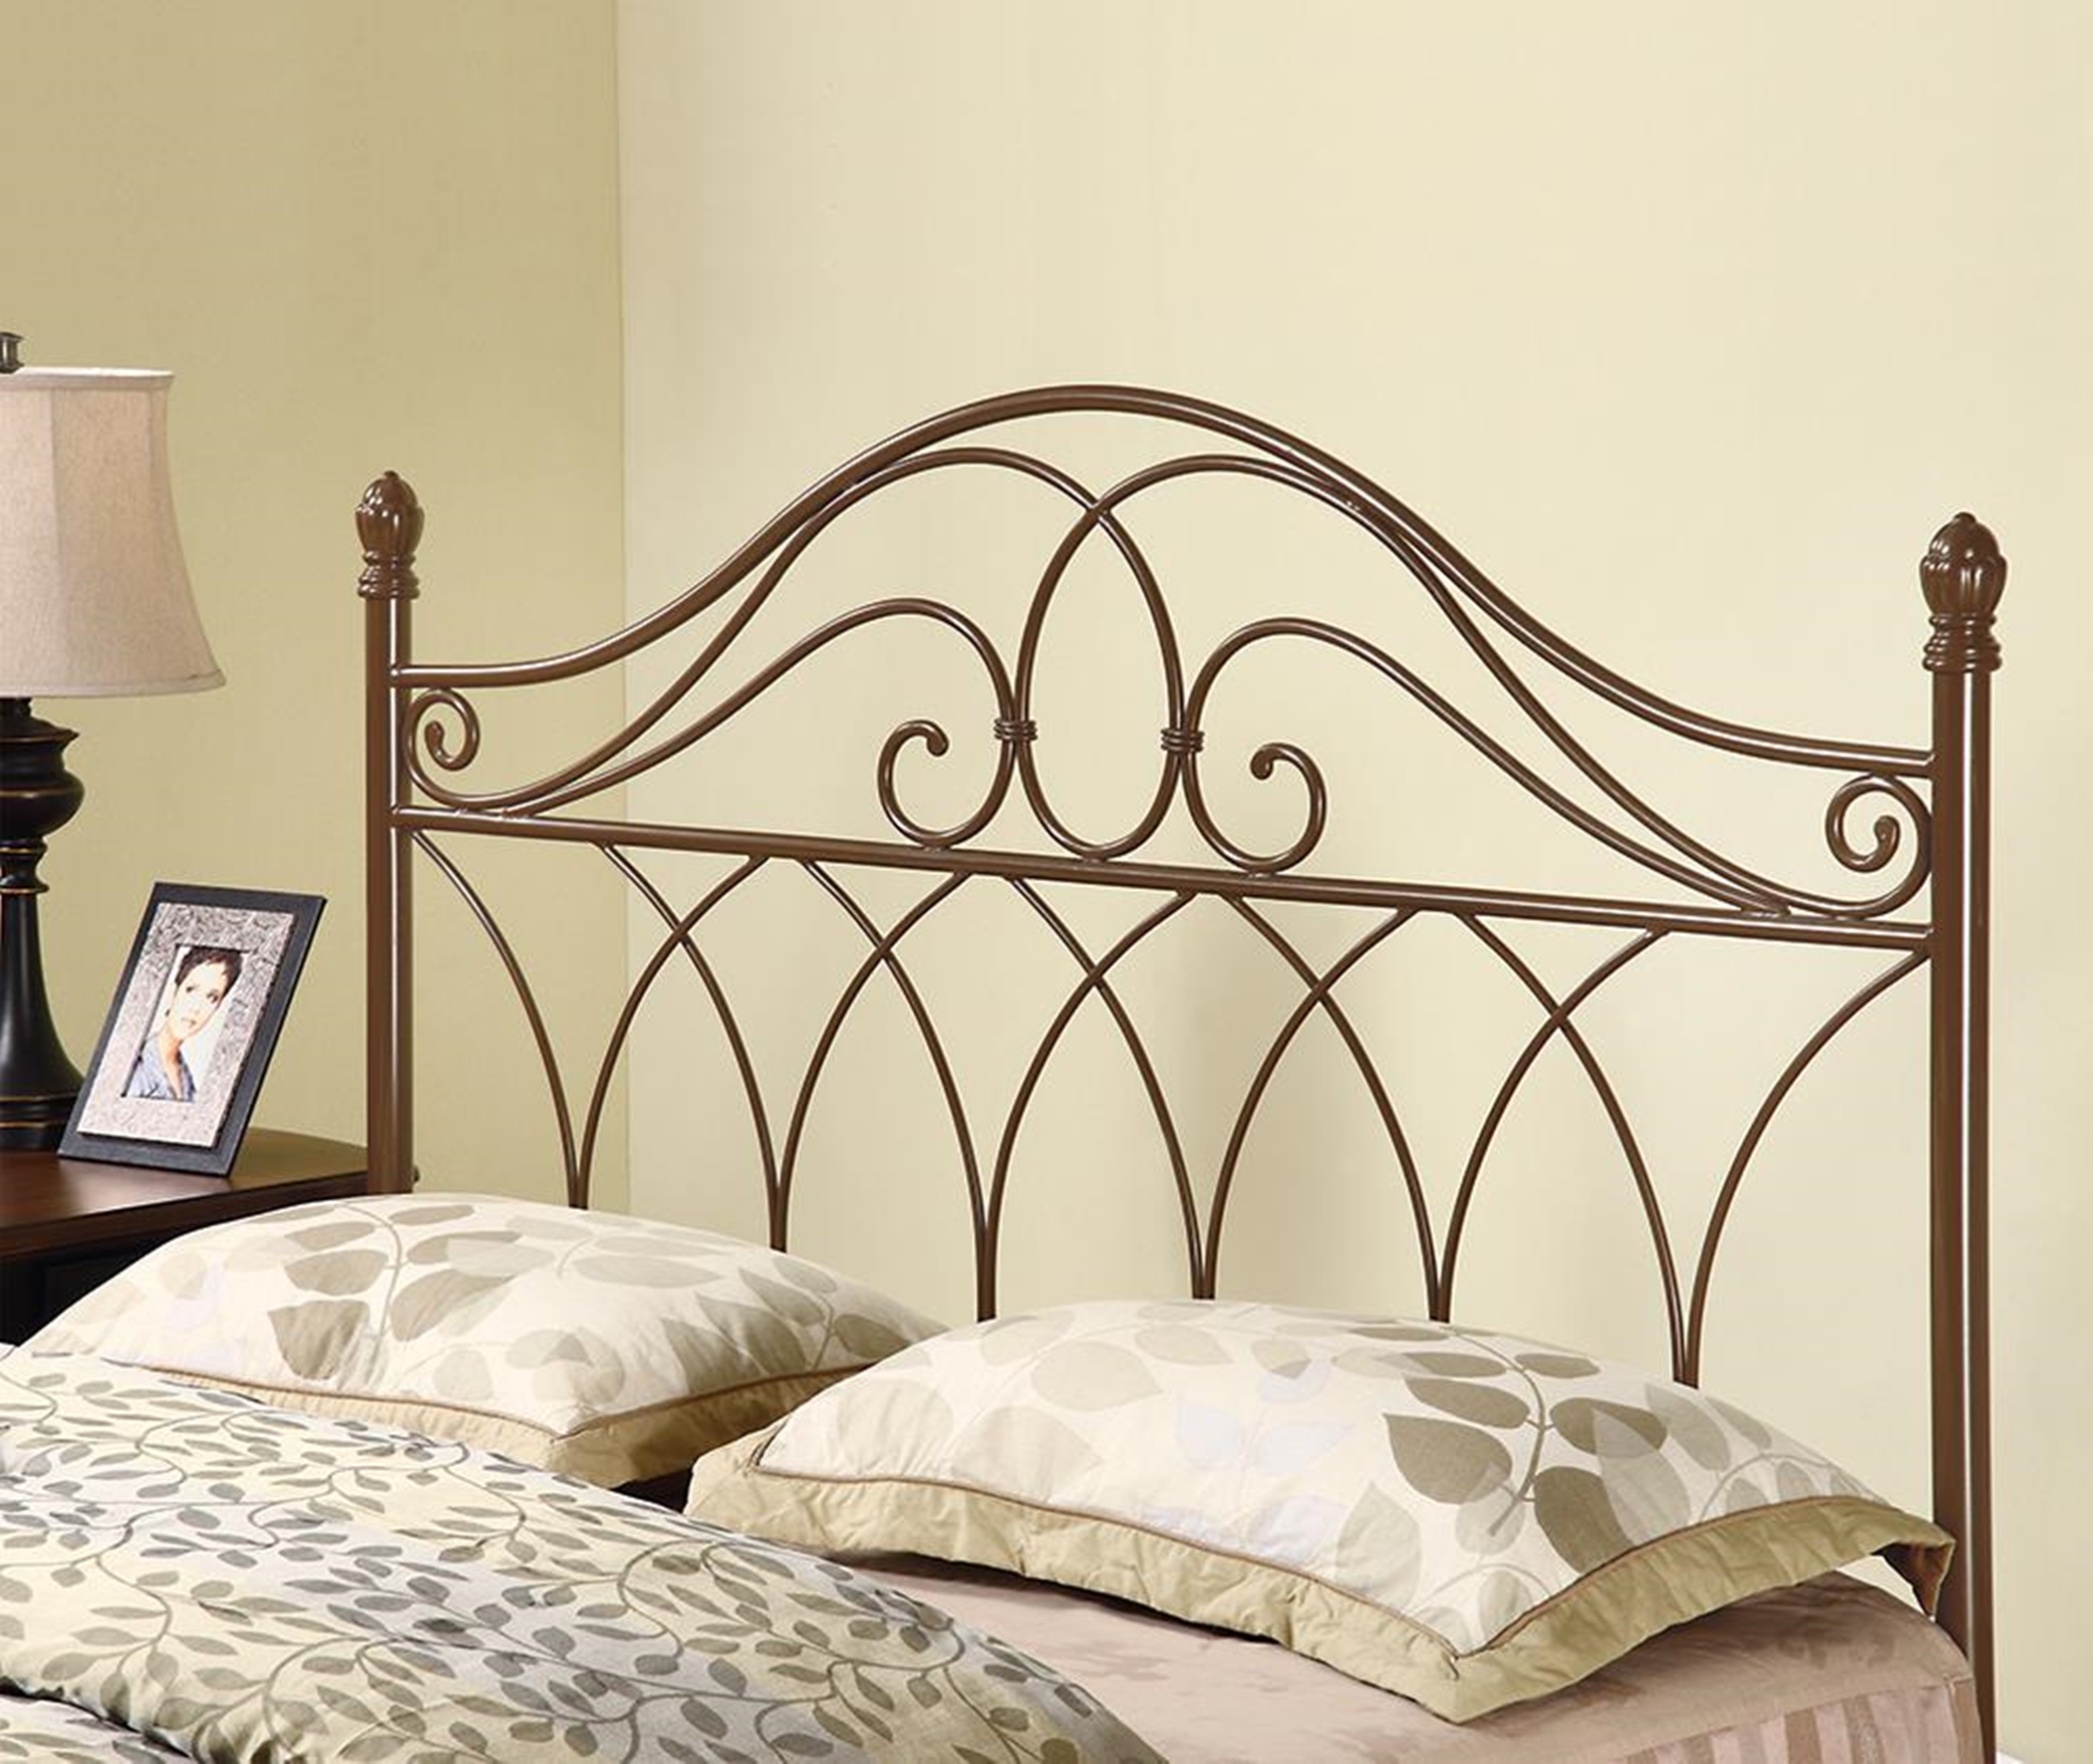 Rich Brown Metal Headboard with Weave Design - Click Image to Close